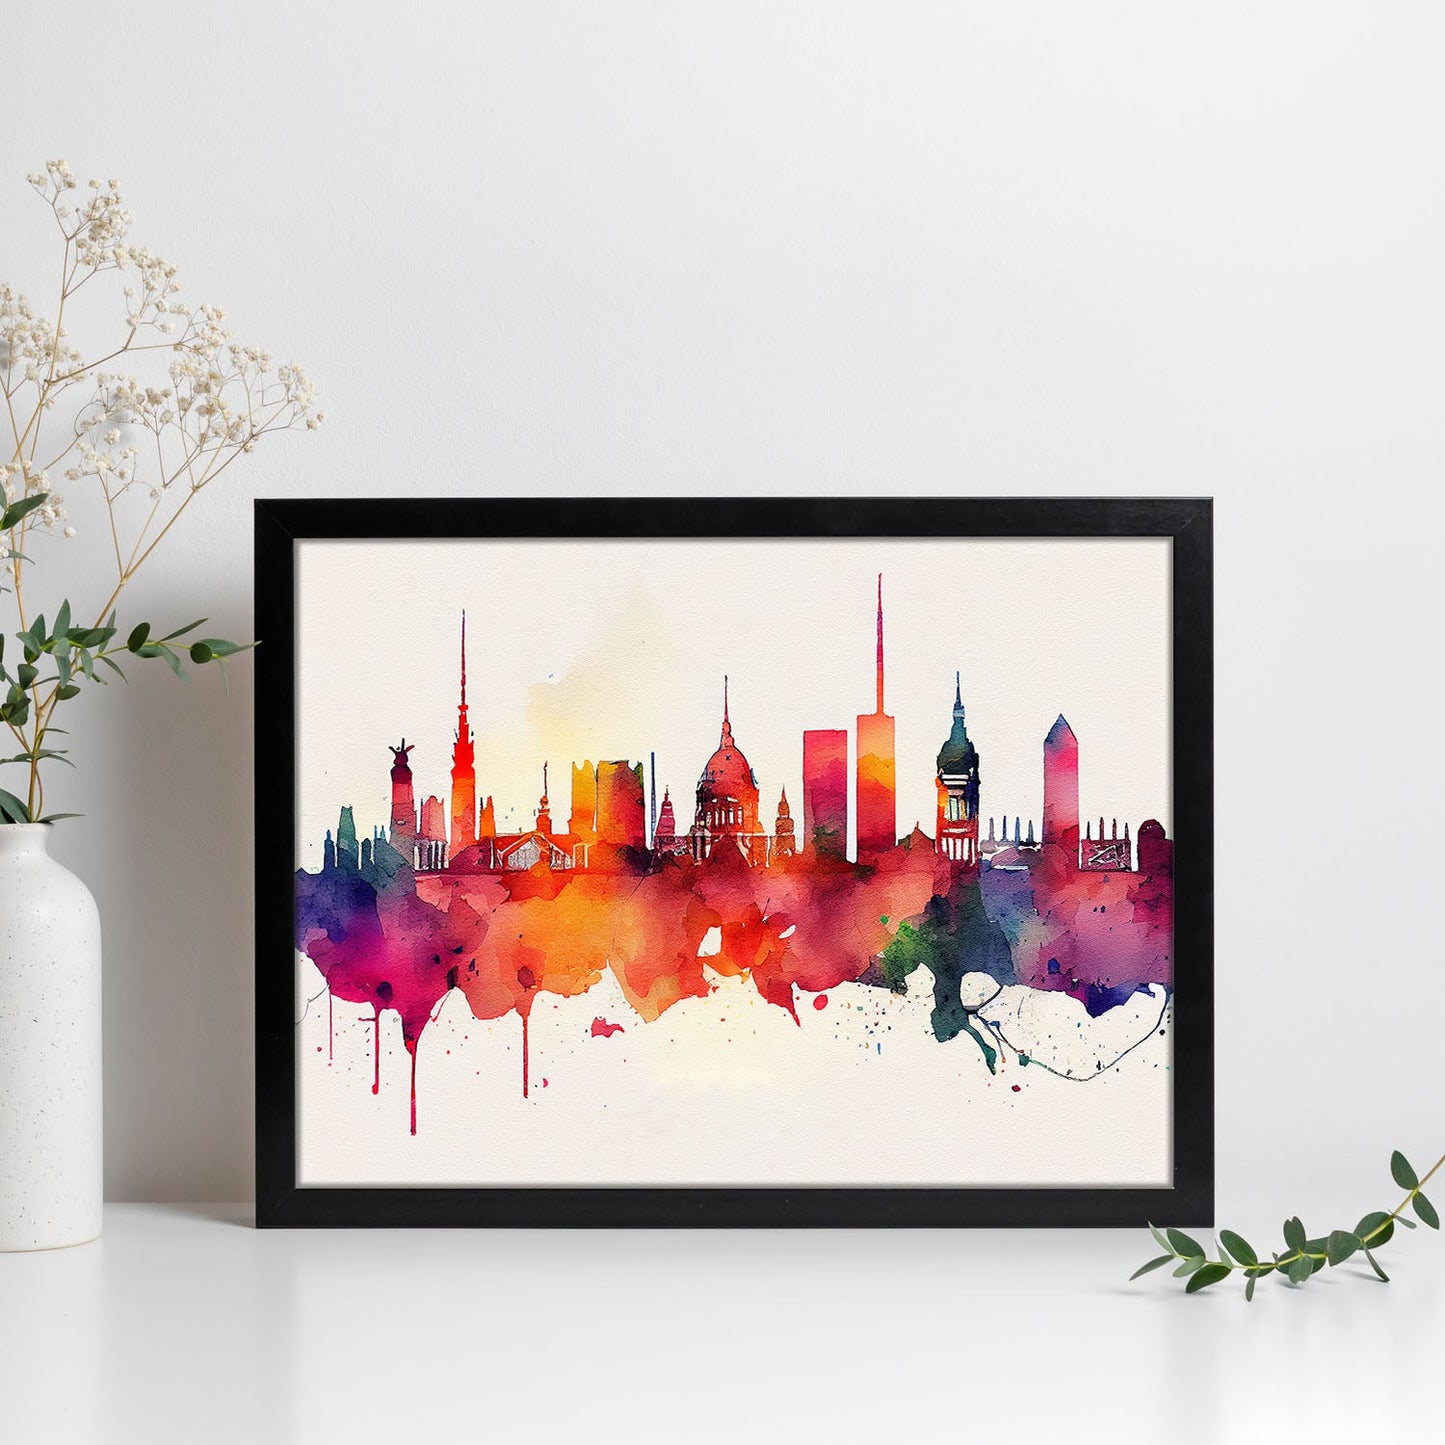 Nacnic watercolor of a skyline of the city of Berlin_3. Aesthetic Wall Art Prints for Bedroom or Living Room Design.-Artwork-Nacnic-A4-Sin Marco-Nacnic Estudio SL